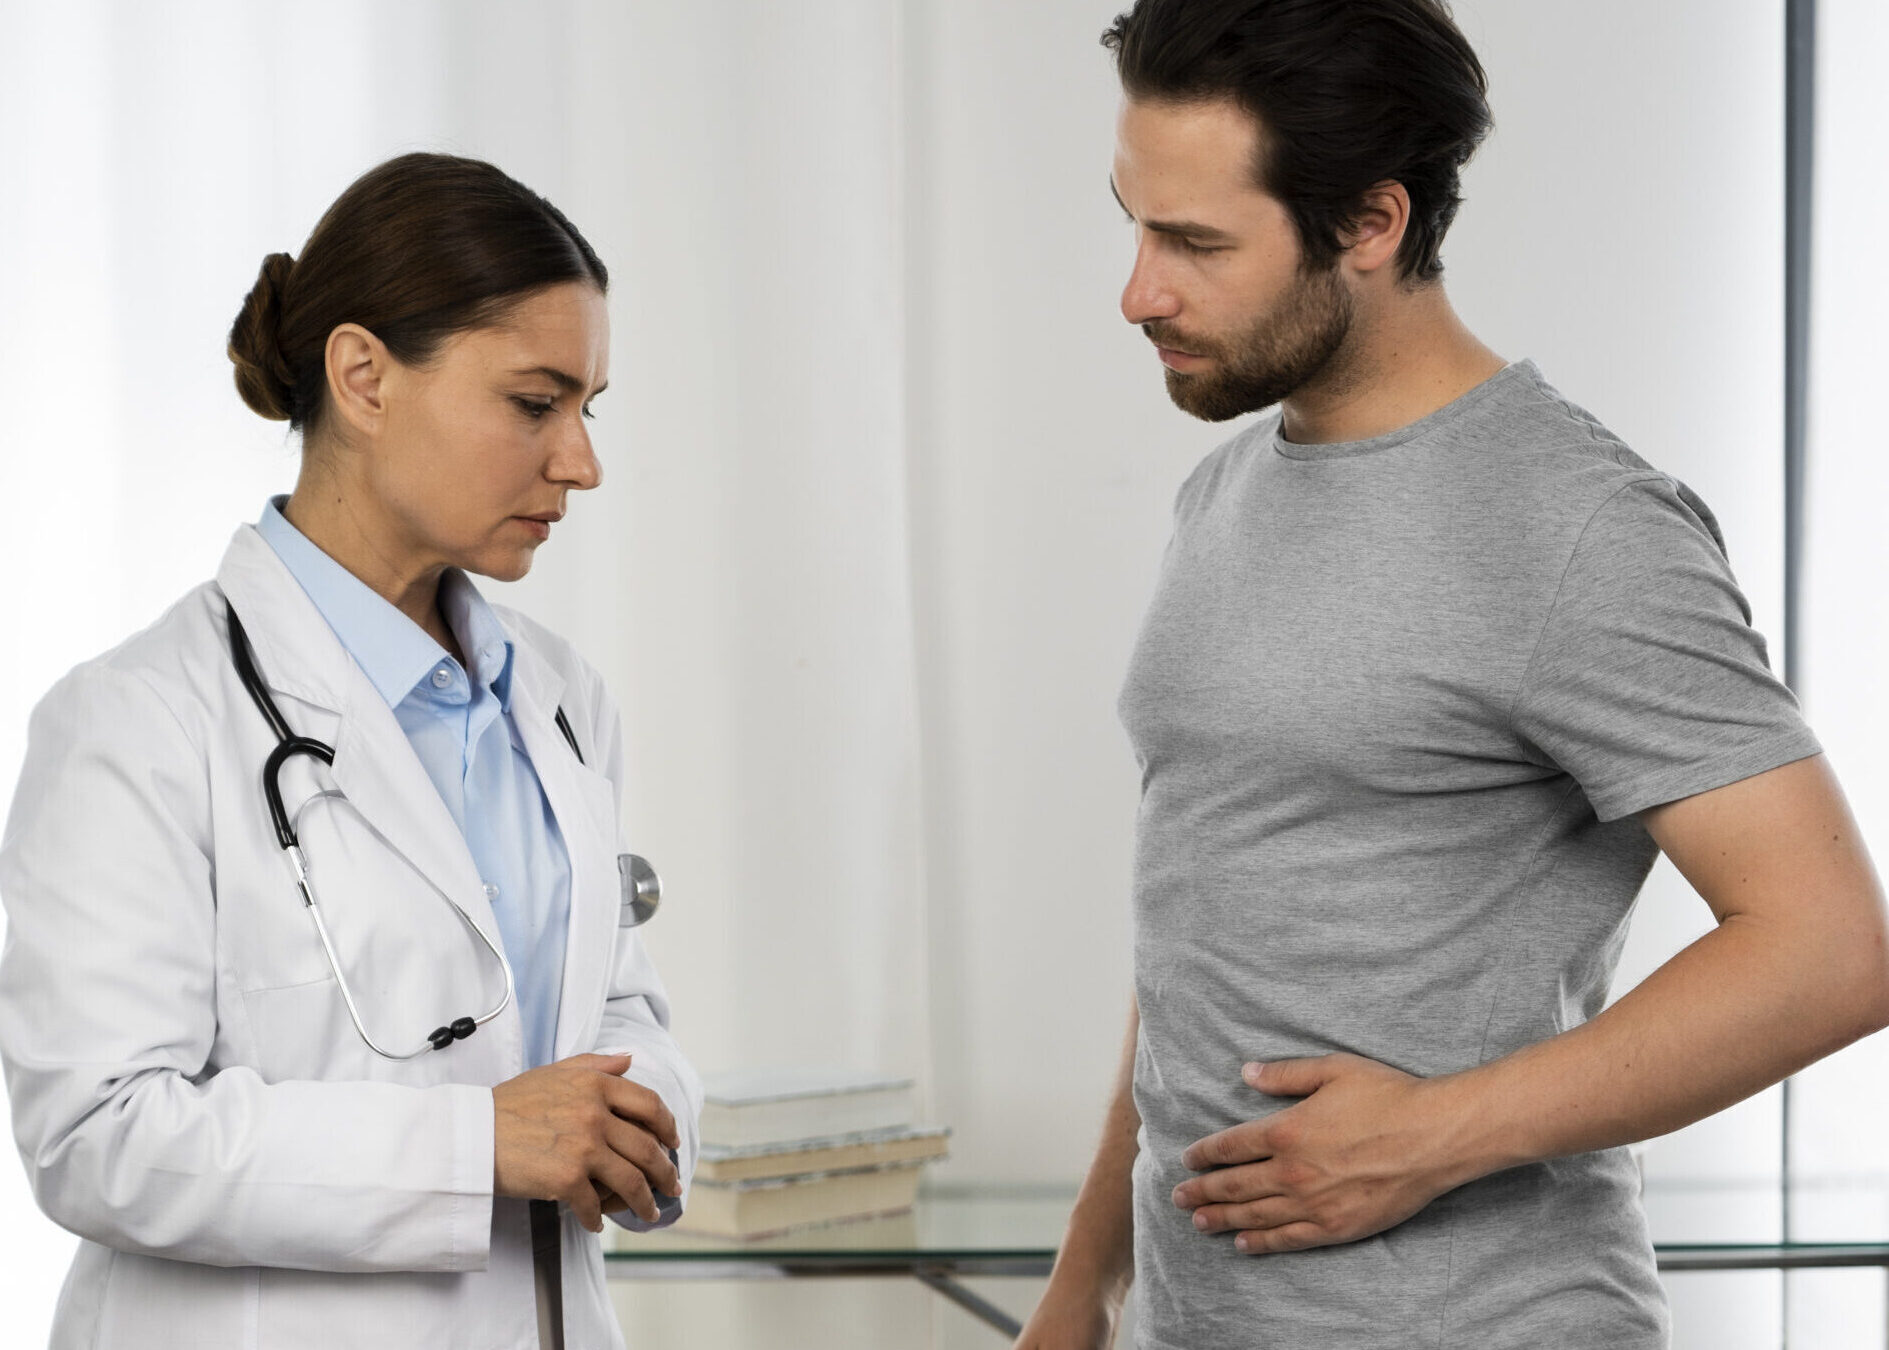 An image showing a doctor consulting a patient for gastroenterology.